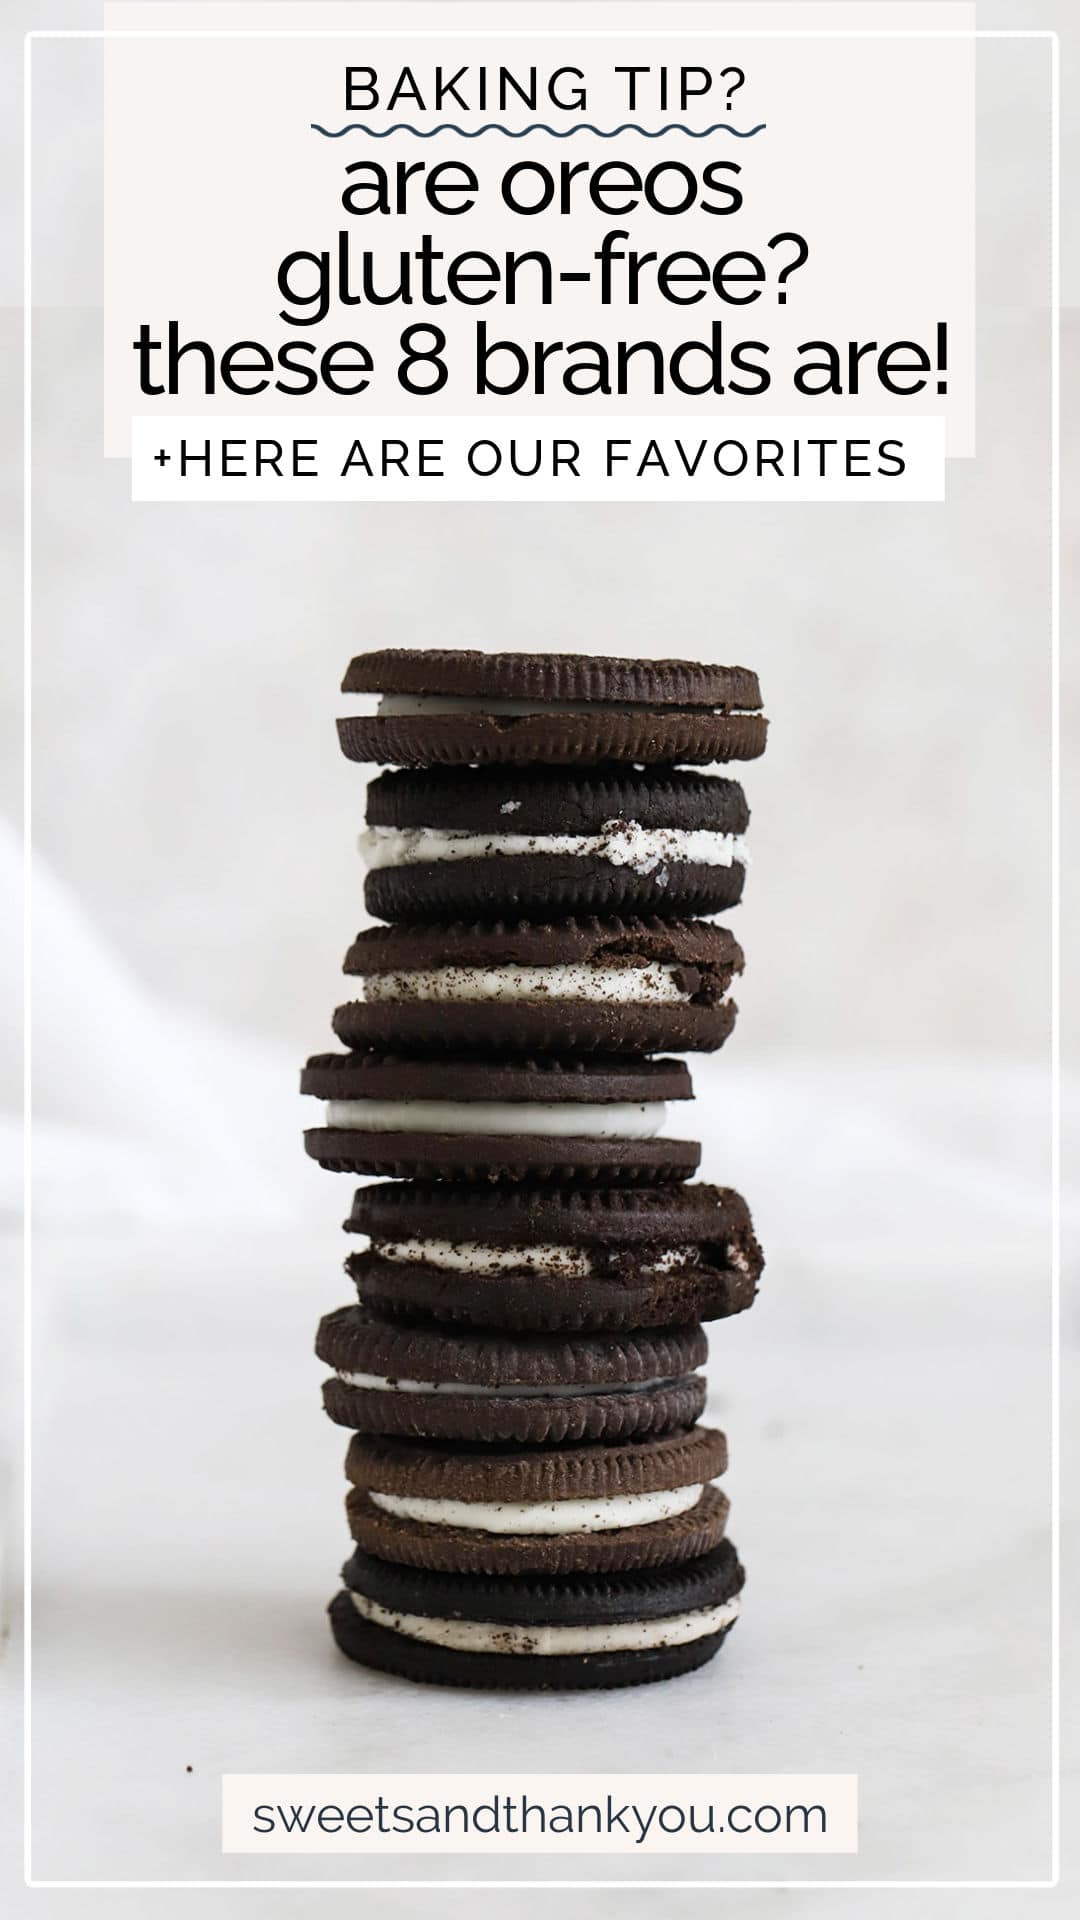 Here are 8 brands of gluten-free chocolate sandwich cookies next time you get the craving or need gluten-free Oreos for a recipe! // gluten free oreos // the best gluten-free oreos // gluten free oreo taste test // gluten-free cookies // gluten-free sandwich cookies // are oreos gluten-free // are there gluten-free oreos // gluten-free oreo substitutes //